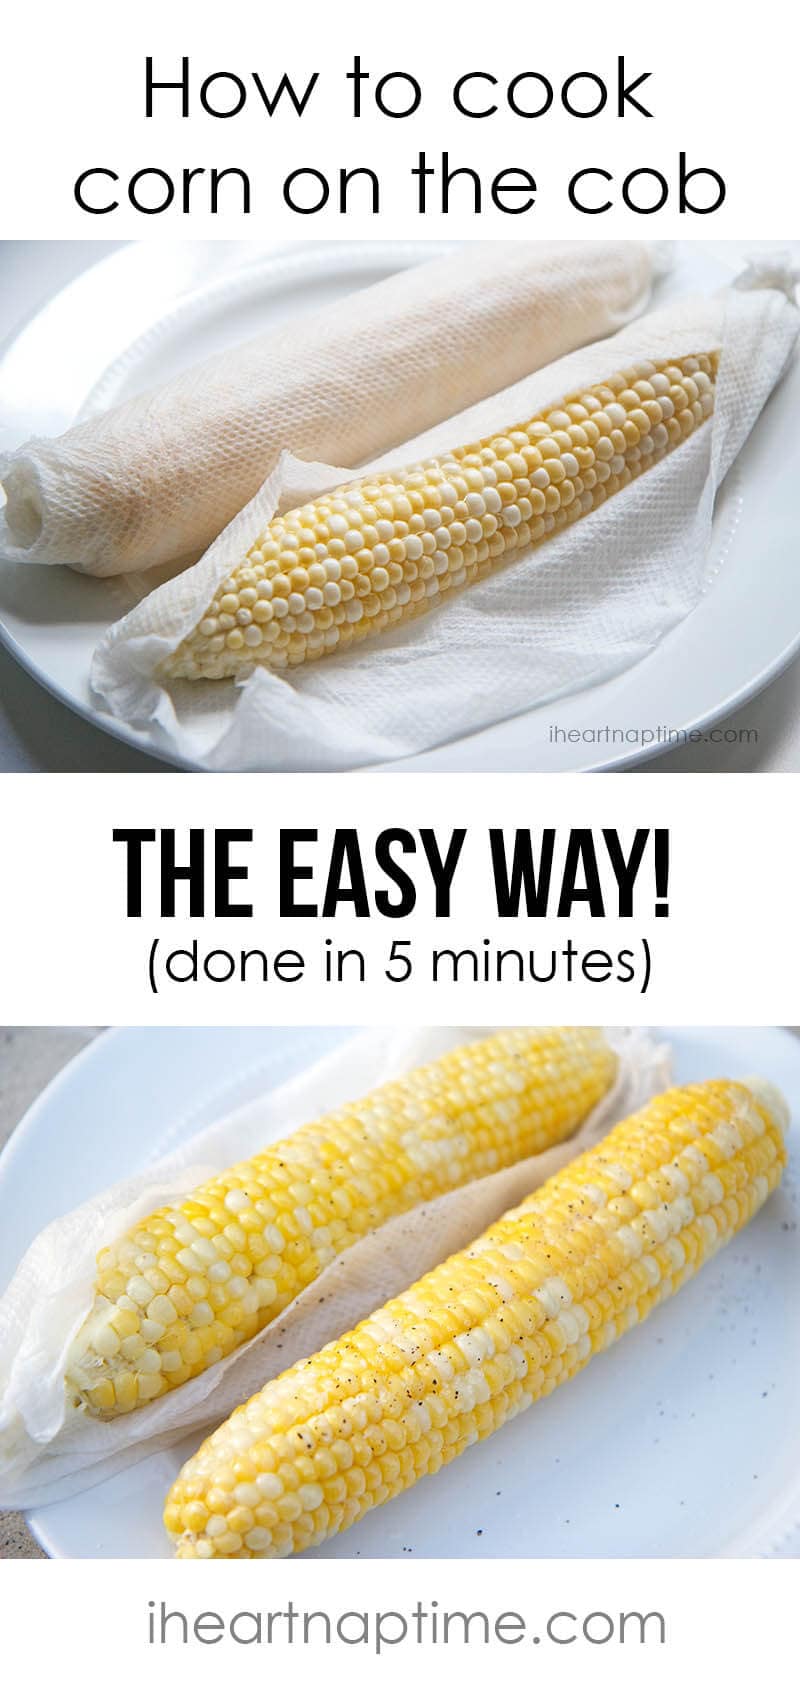 How to cook corn on the cob in 5 minutes flat! #tips